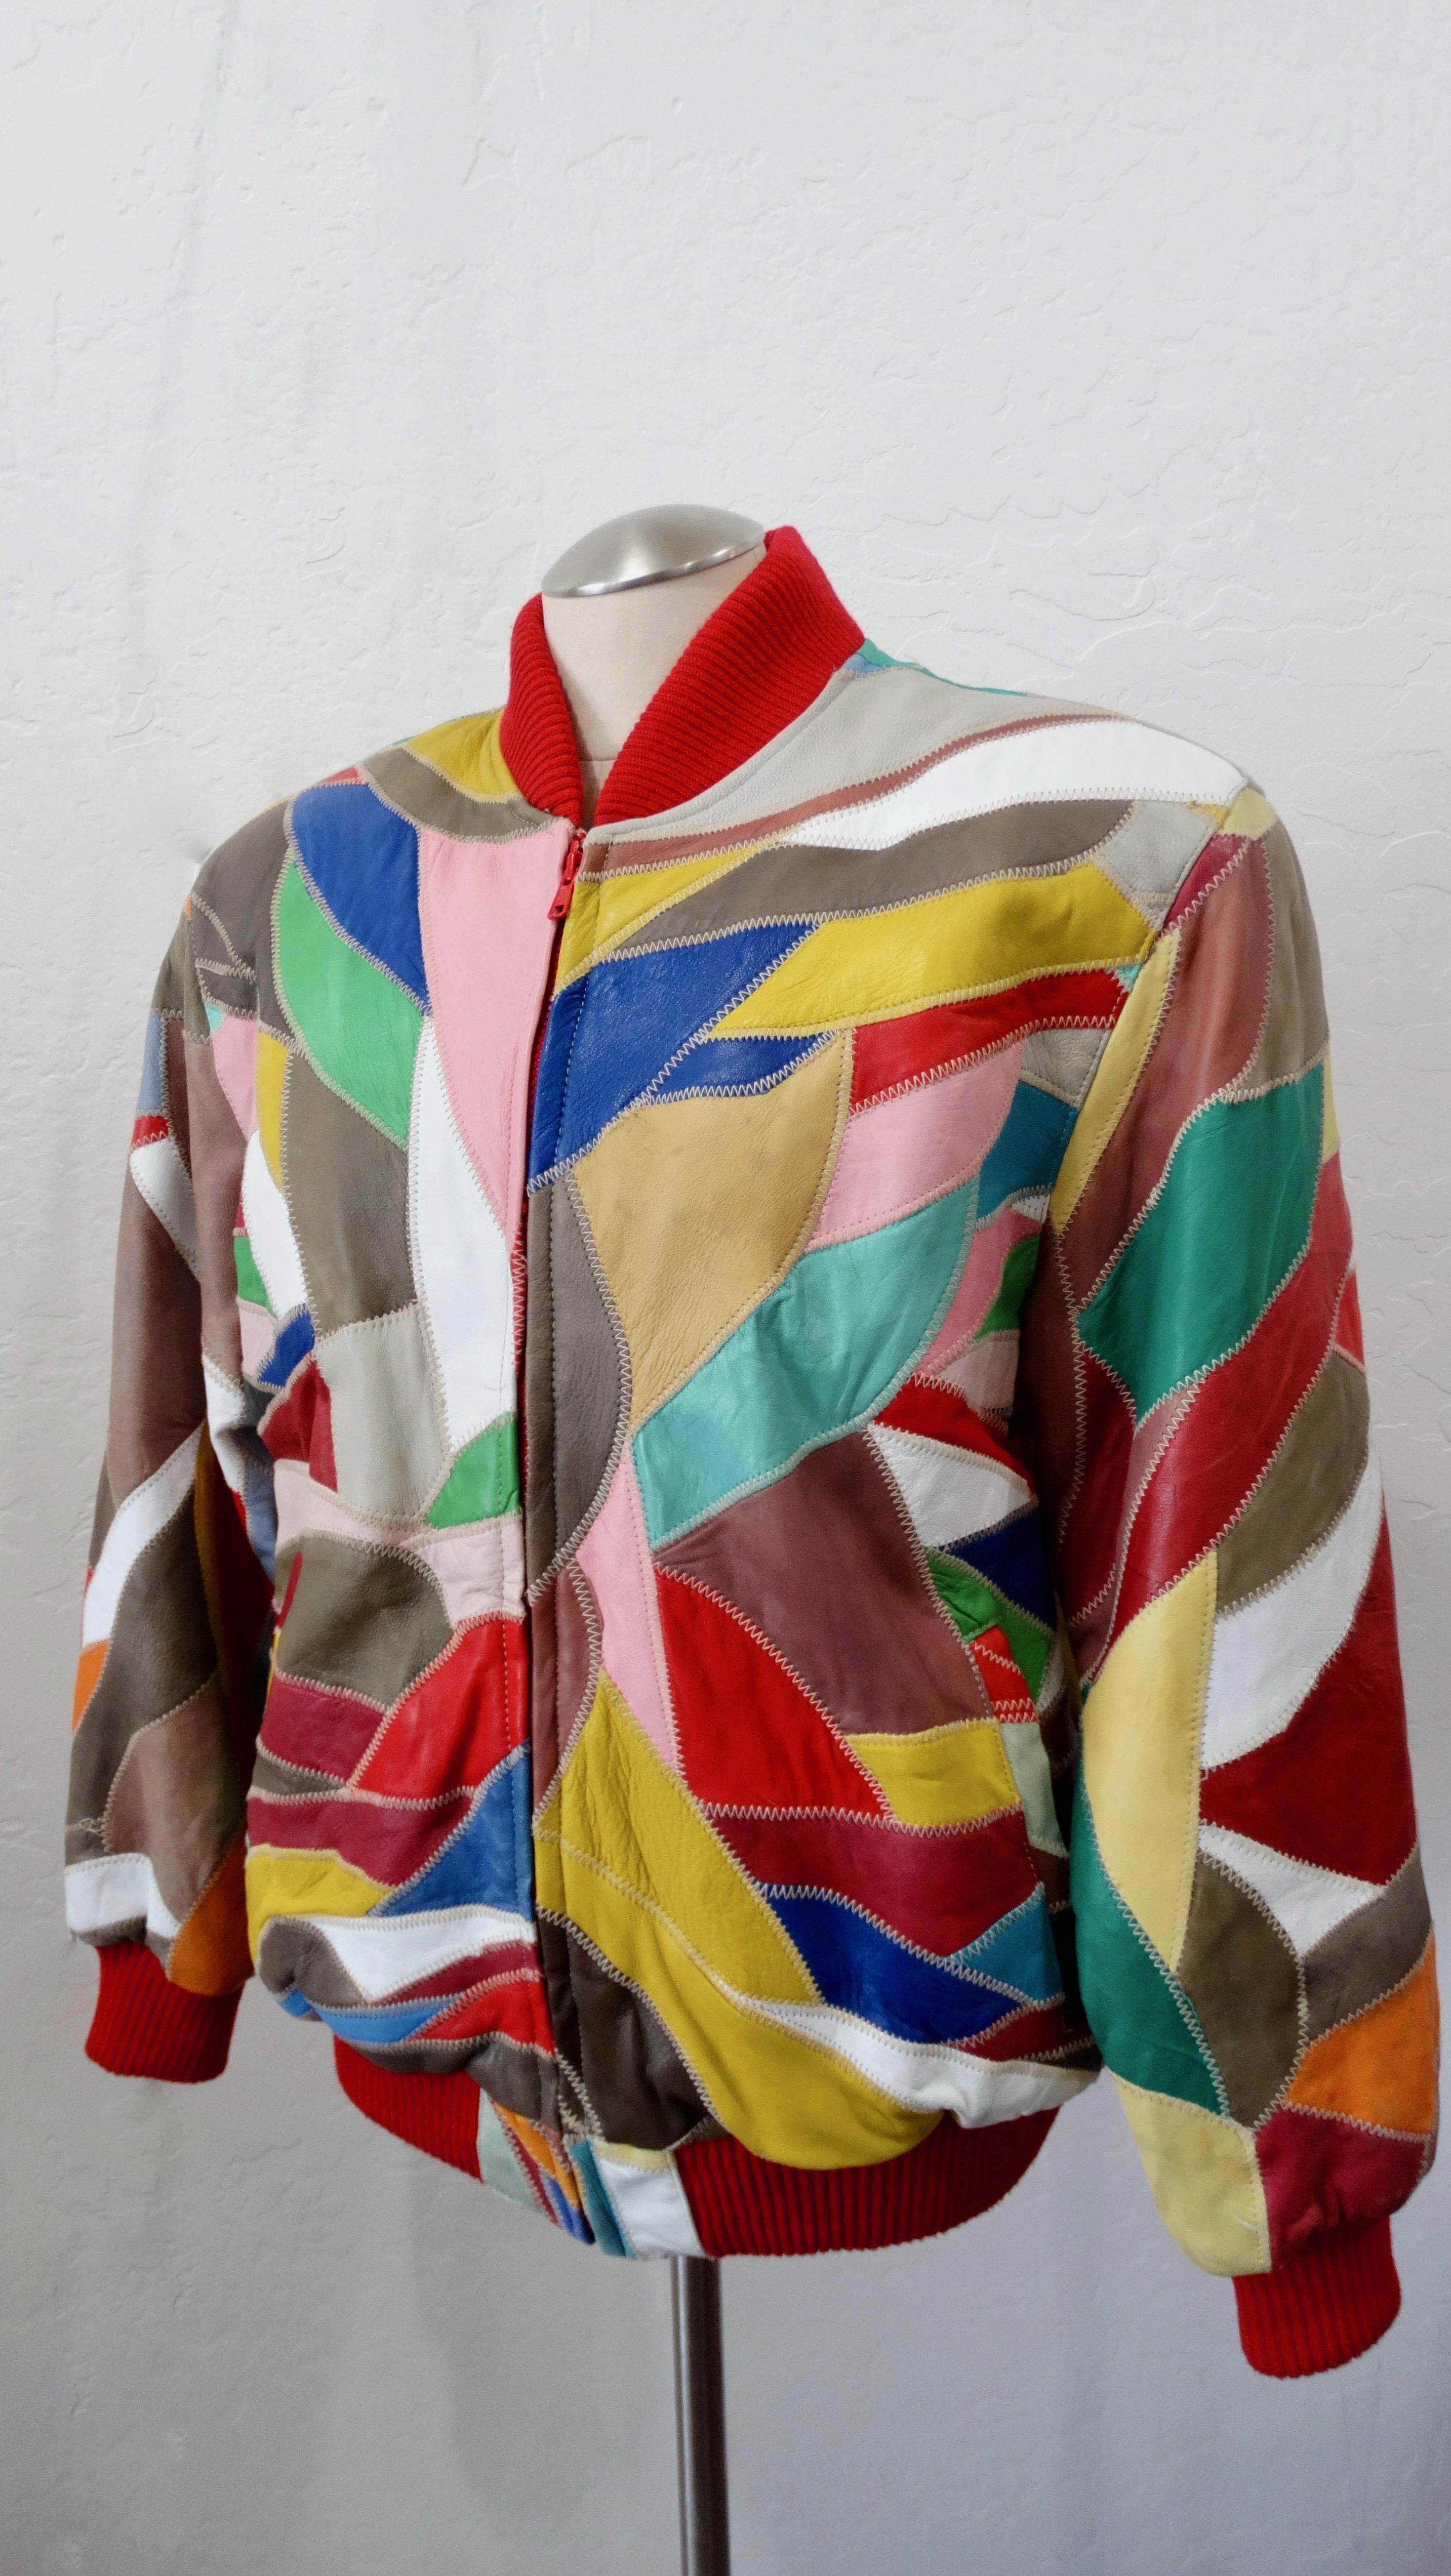 Stay in style while beating the cold weather! Circa 1980s, this plush oversized bomber jacket by David Green features appliqué patchwork in multi-colored leather and exposed stitching. The collar, cuffs and bottom hem are trimmed with vibrant red